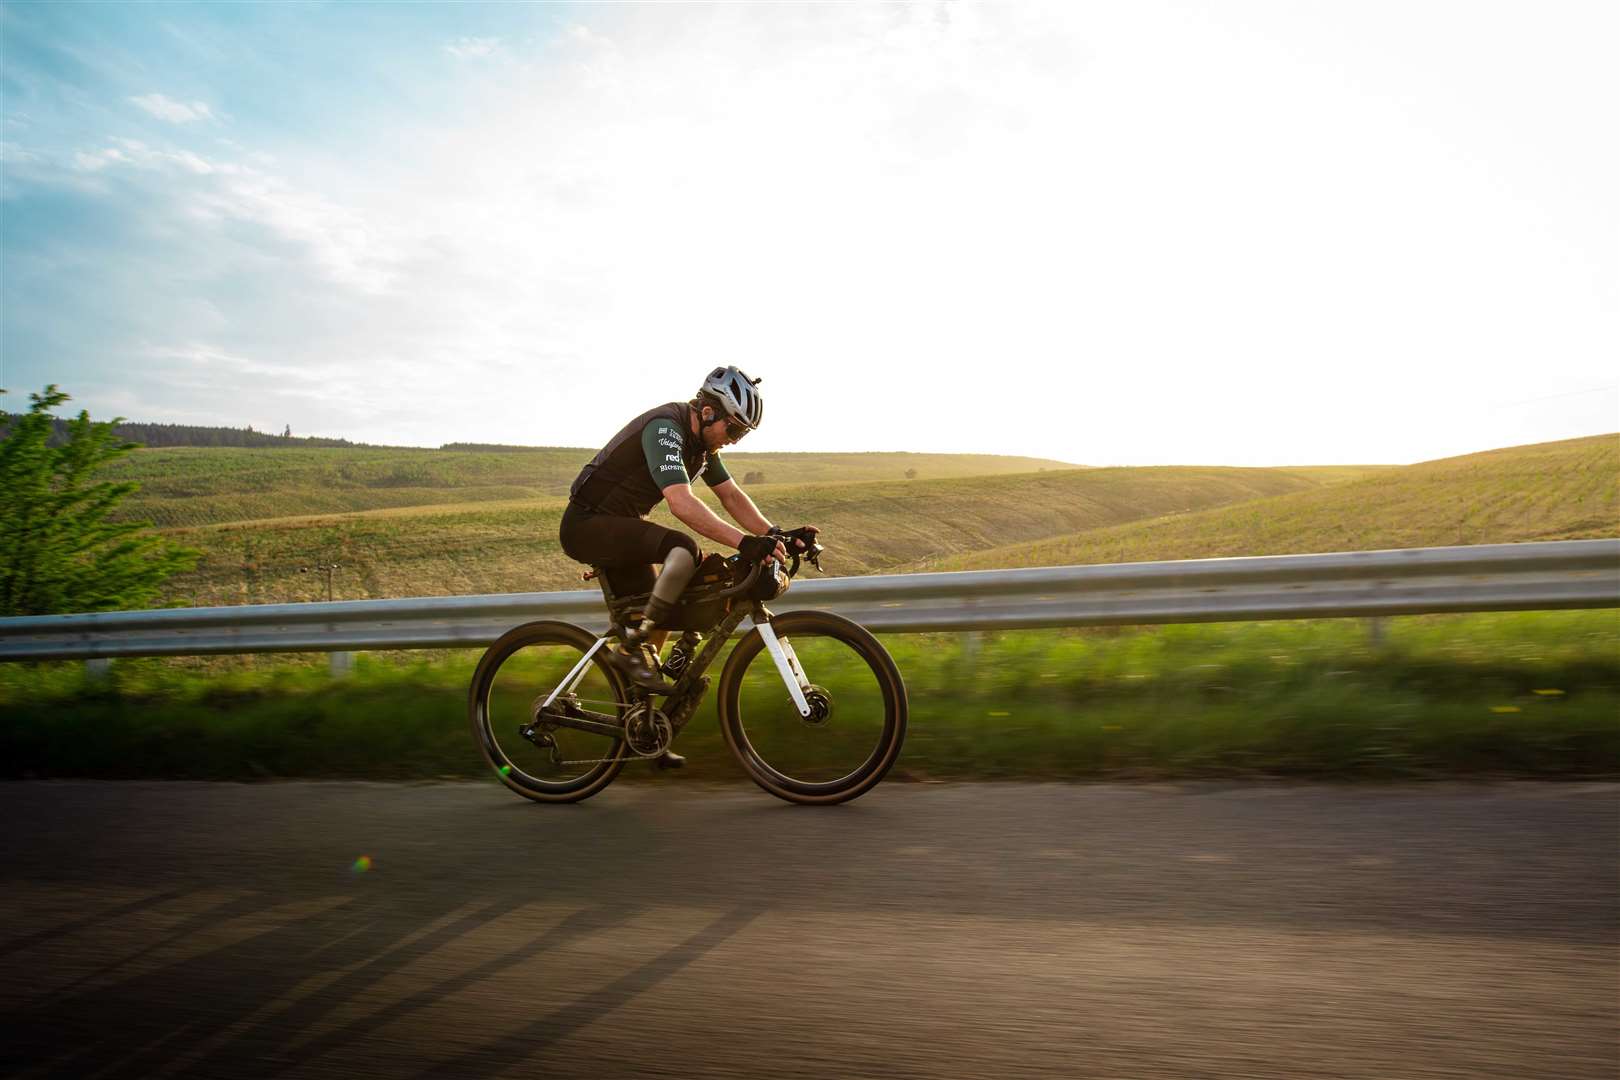 Stuart Croxford on day seven of his 2000km cycle from Land’s End to John O’Groats in aid of a charity that supports limbless and injured veterans.